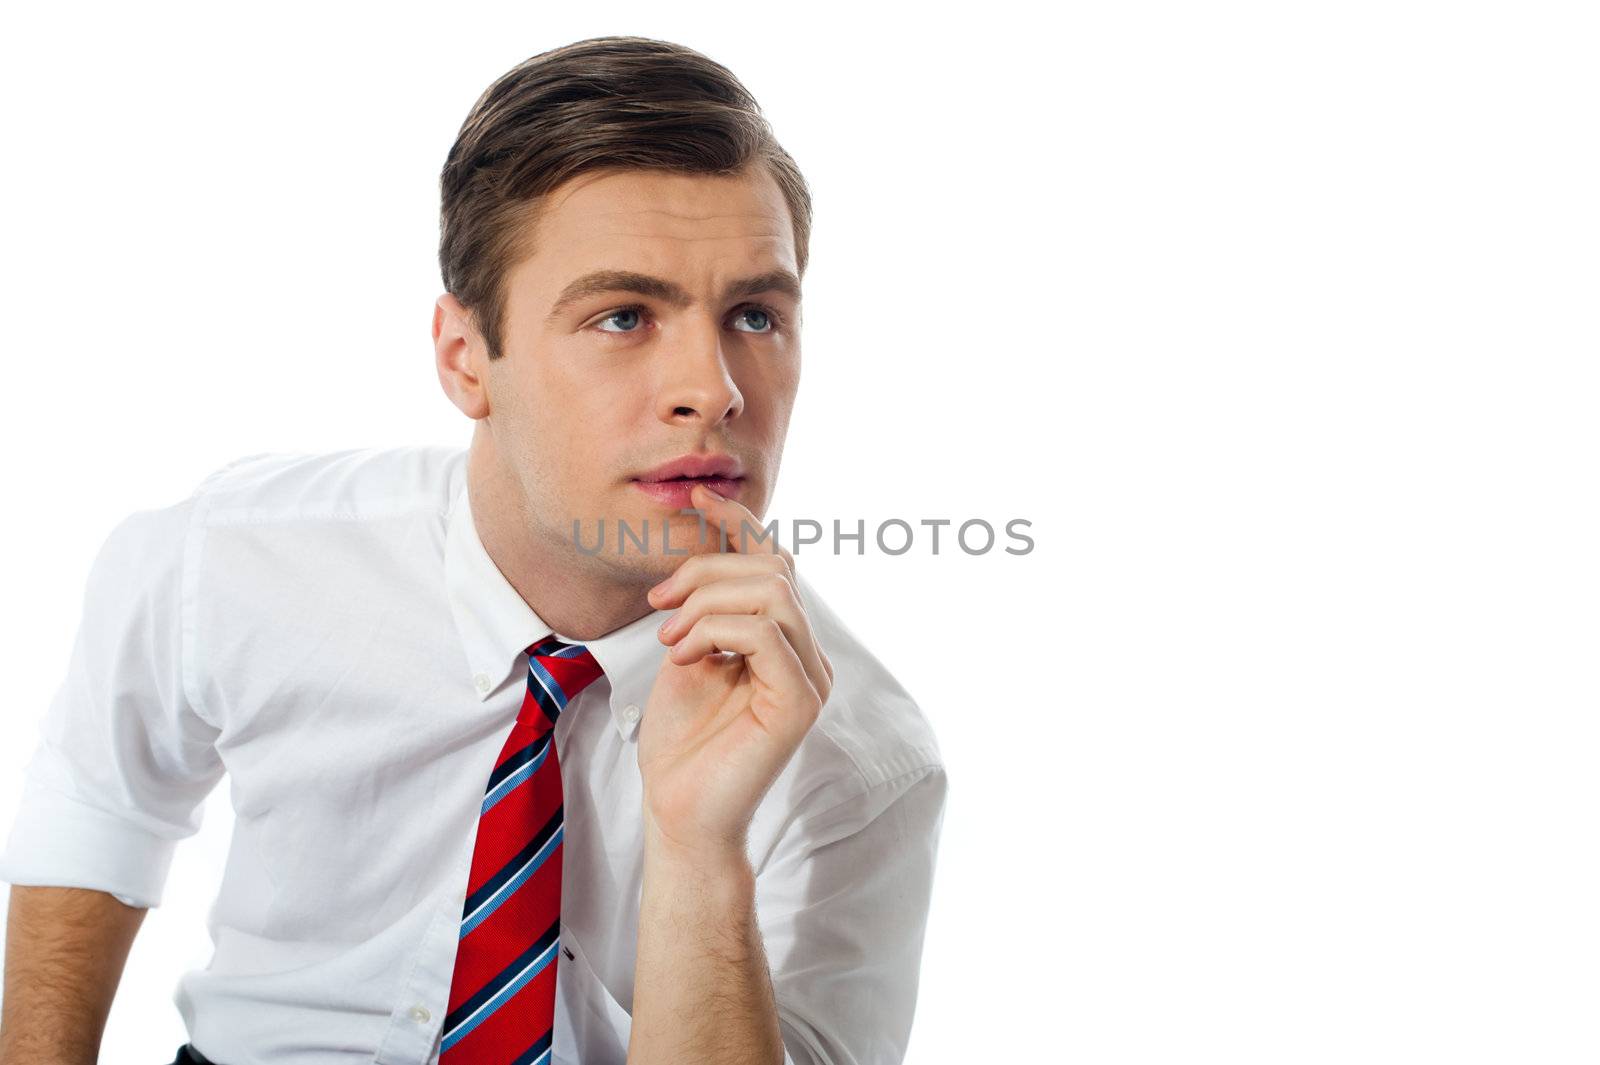 Thoughful business person by stockyimages